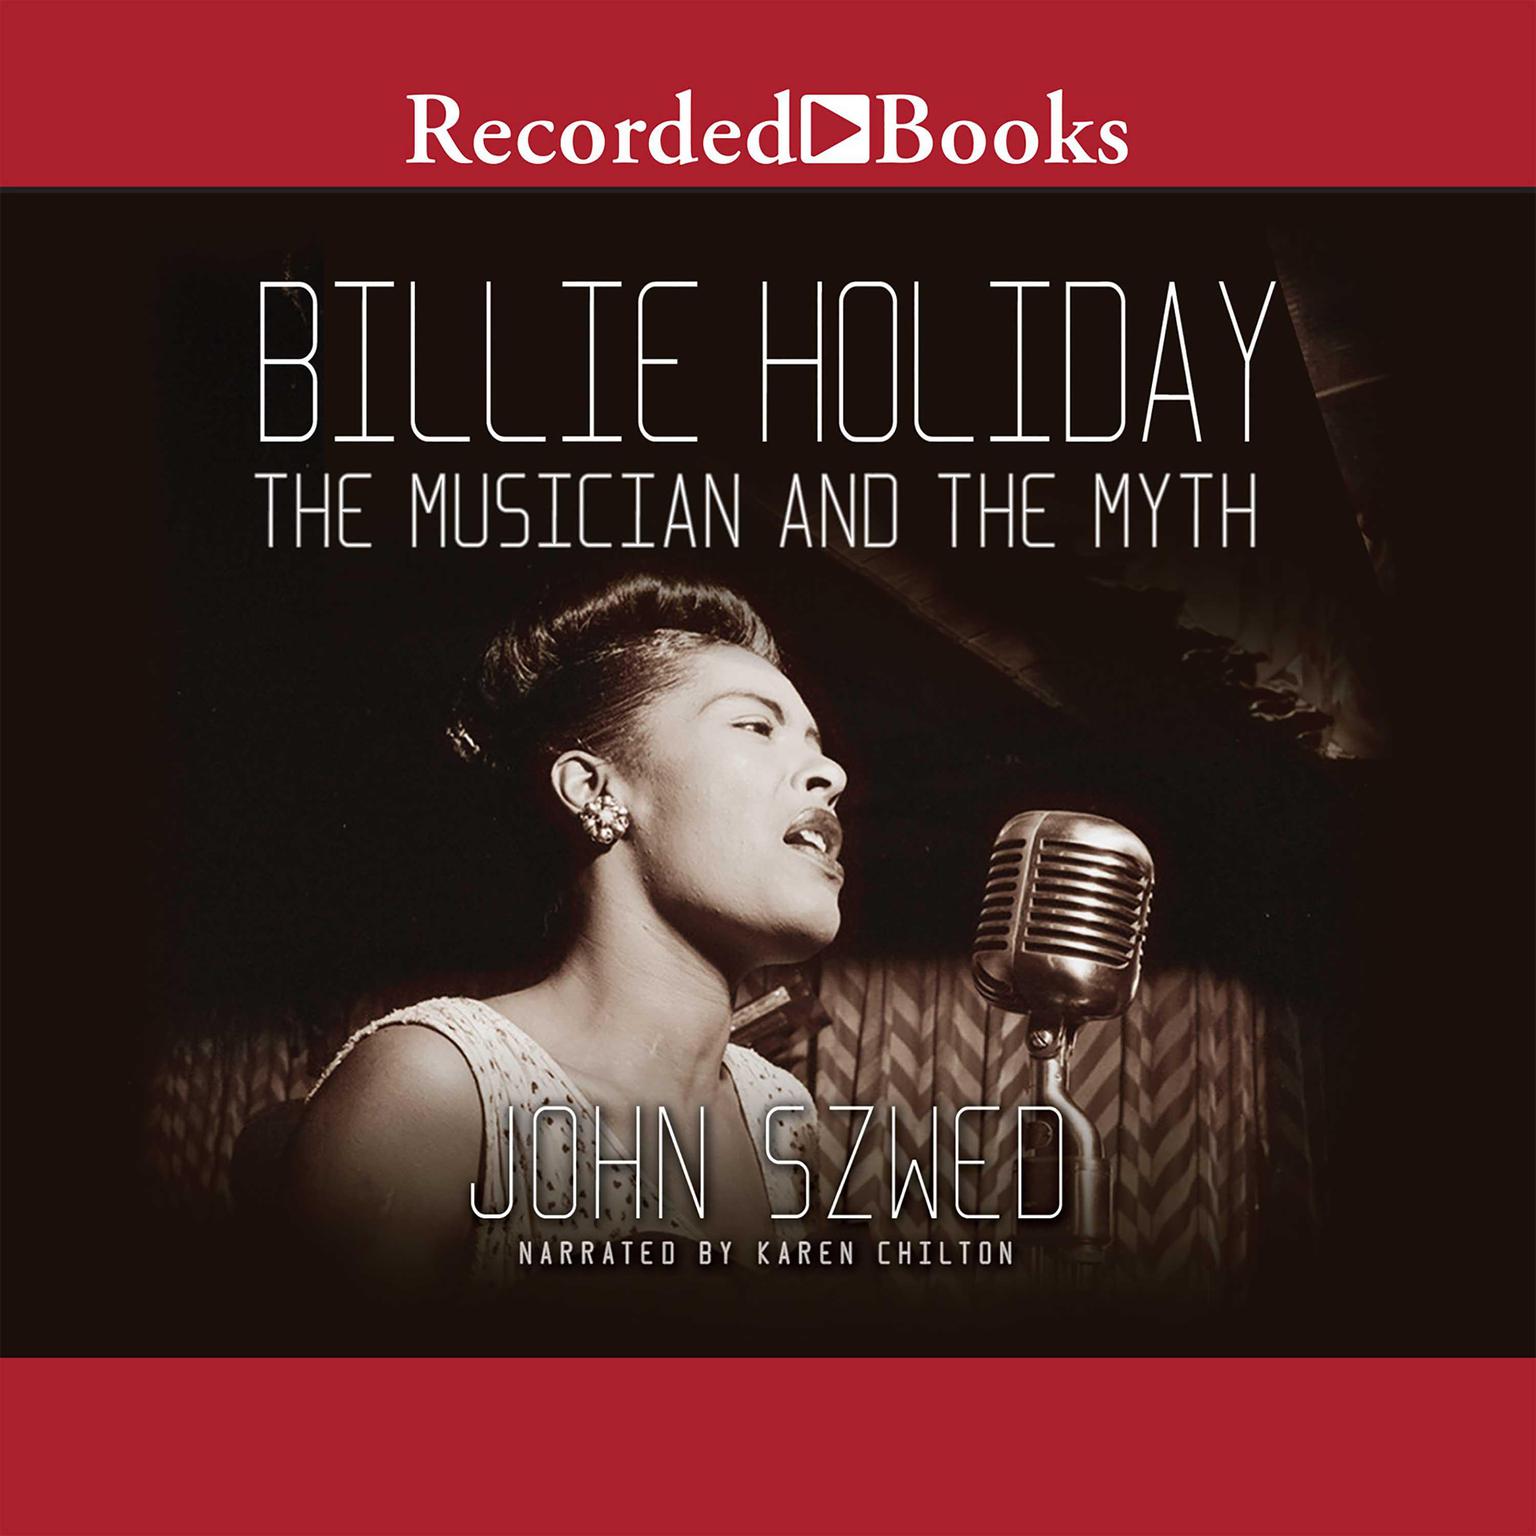 Billie Holiday: The Musician and the Myth Audiobook, by John Szwed